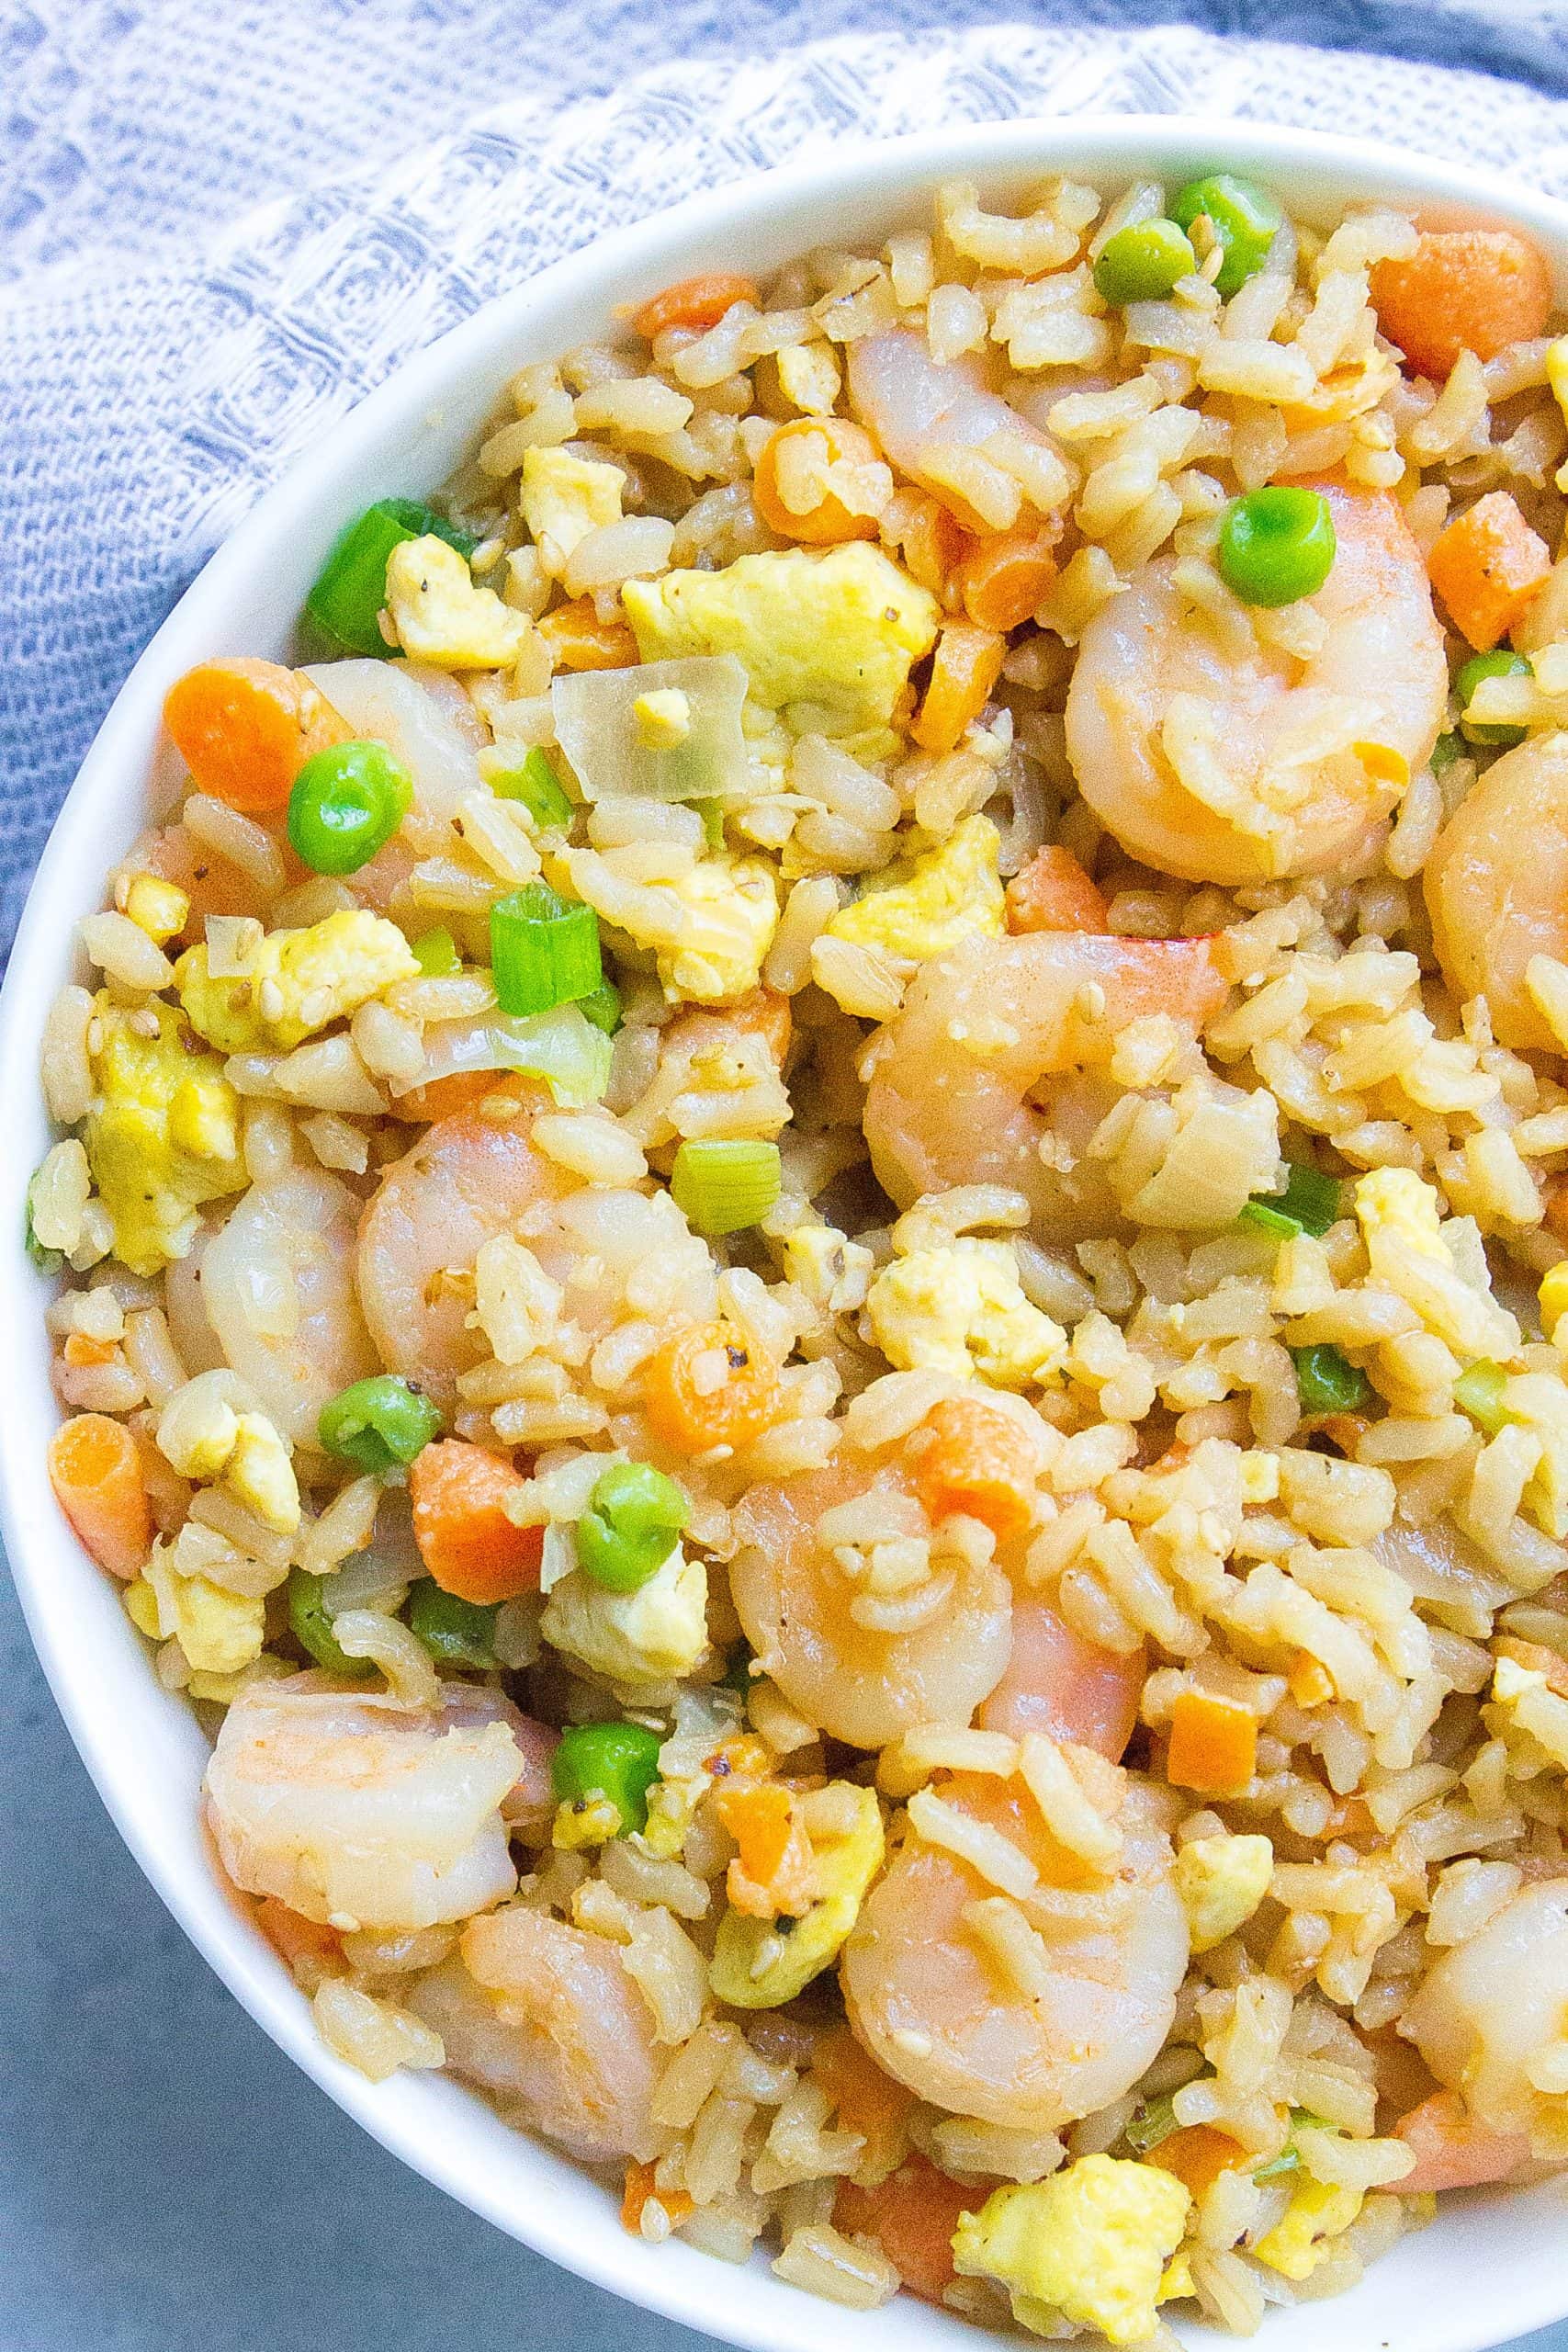 Shrimp Fried Rice (Better than takeout)